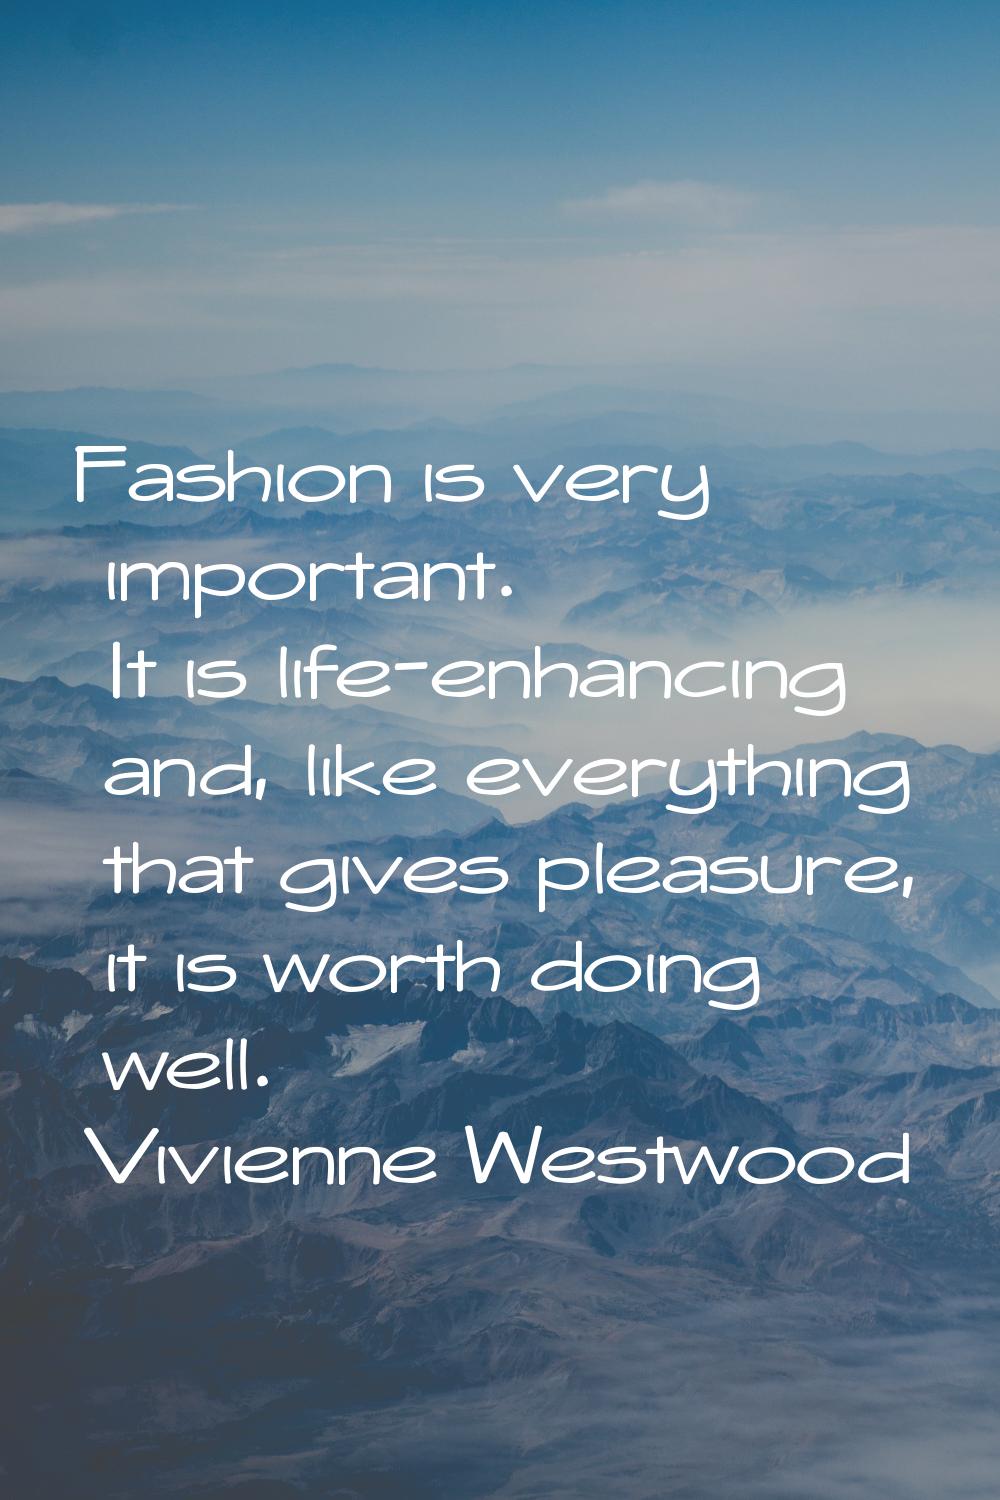 Fashion is very important. It is life-enhancing and, like everything that gives pleasure, it is wor